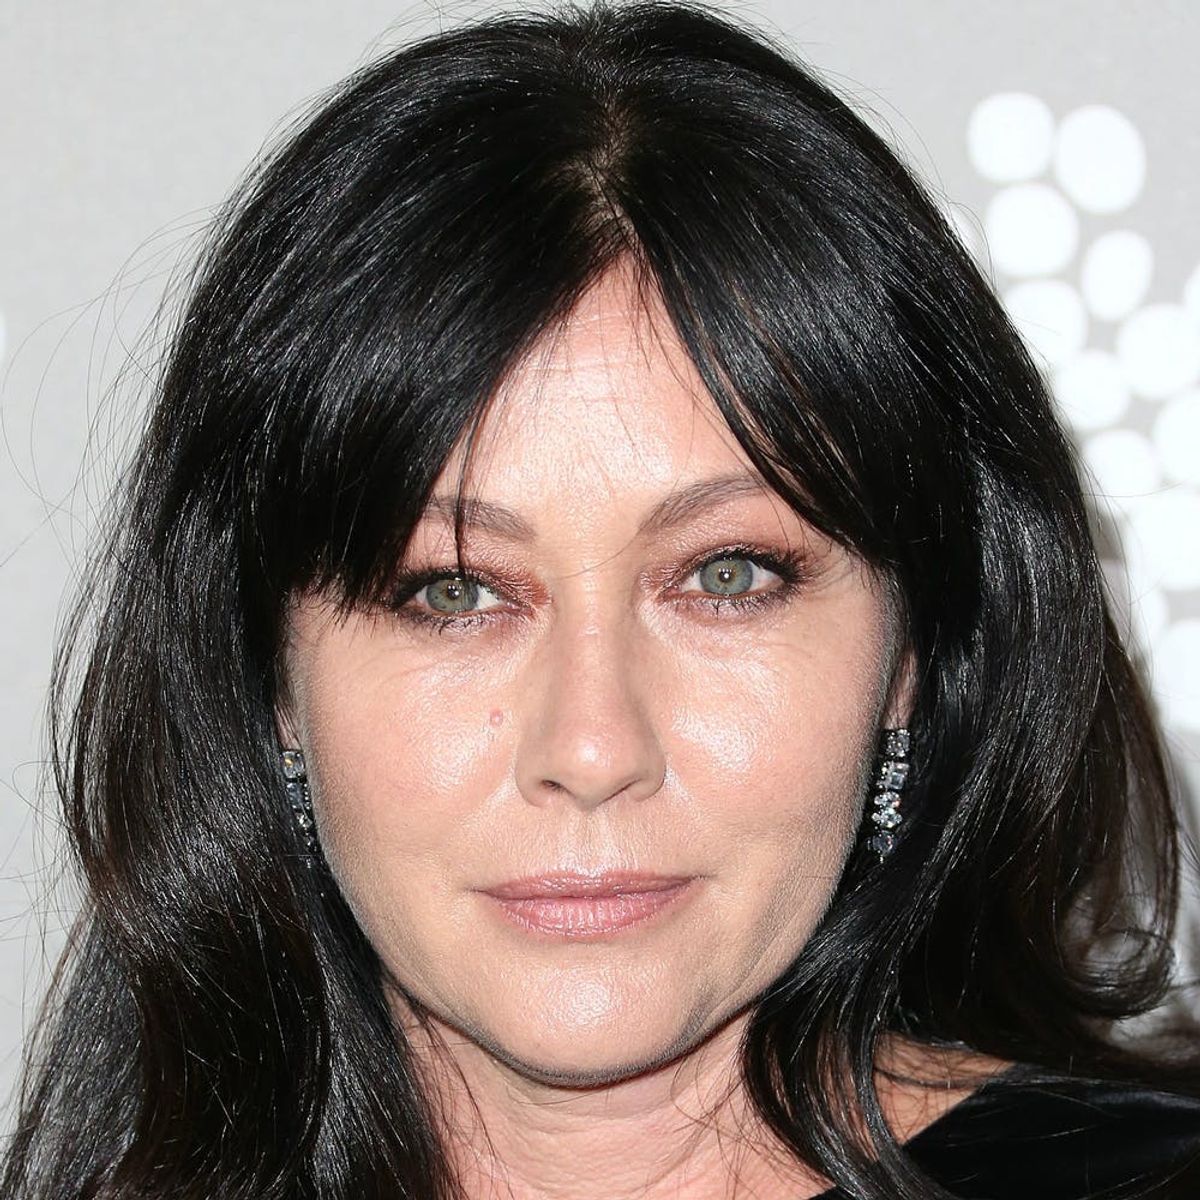 Shannen Doherty’s Devastatingly Beautiful Tribute to Her Mother Will Make You Cry